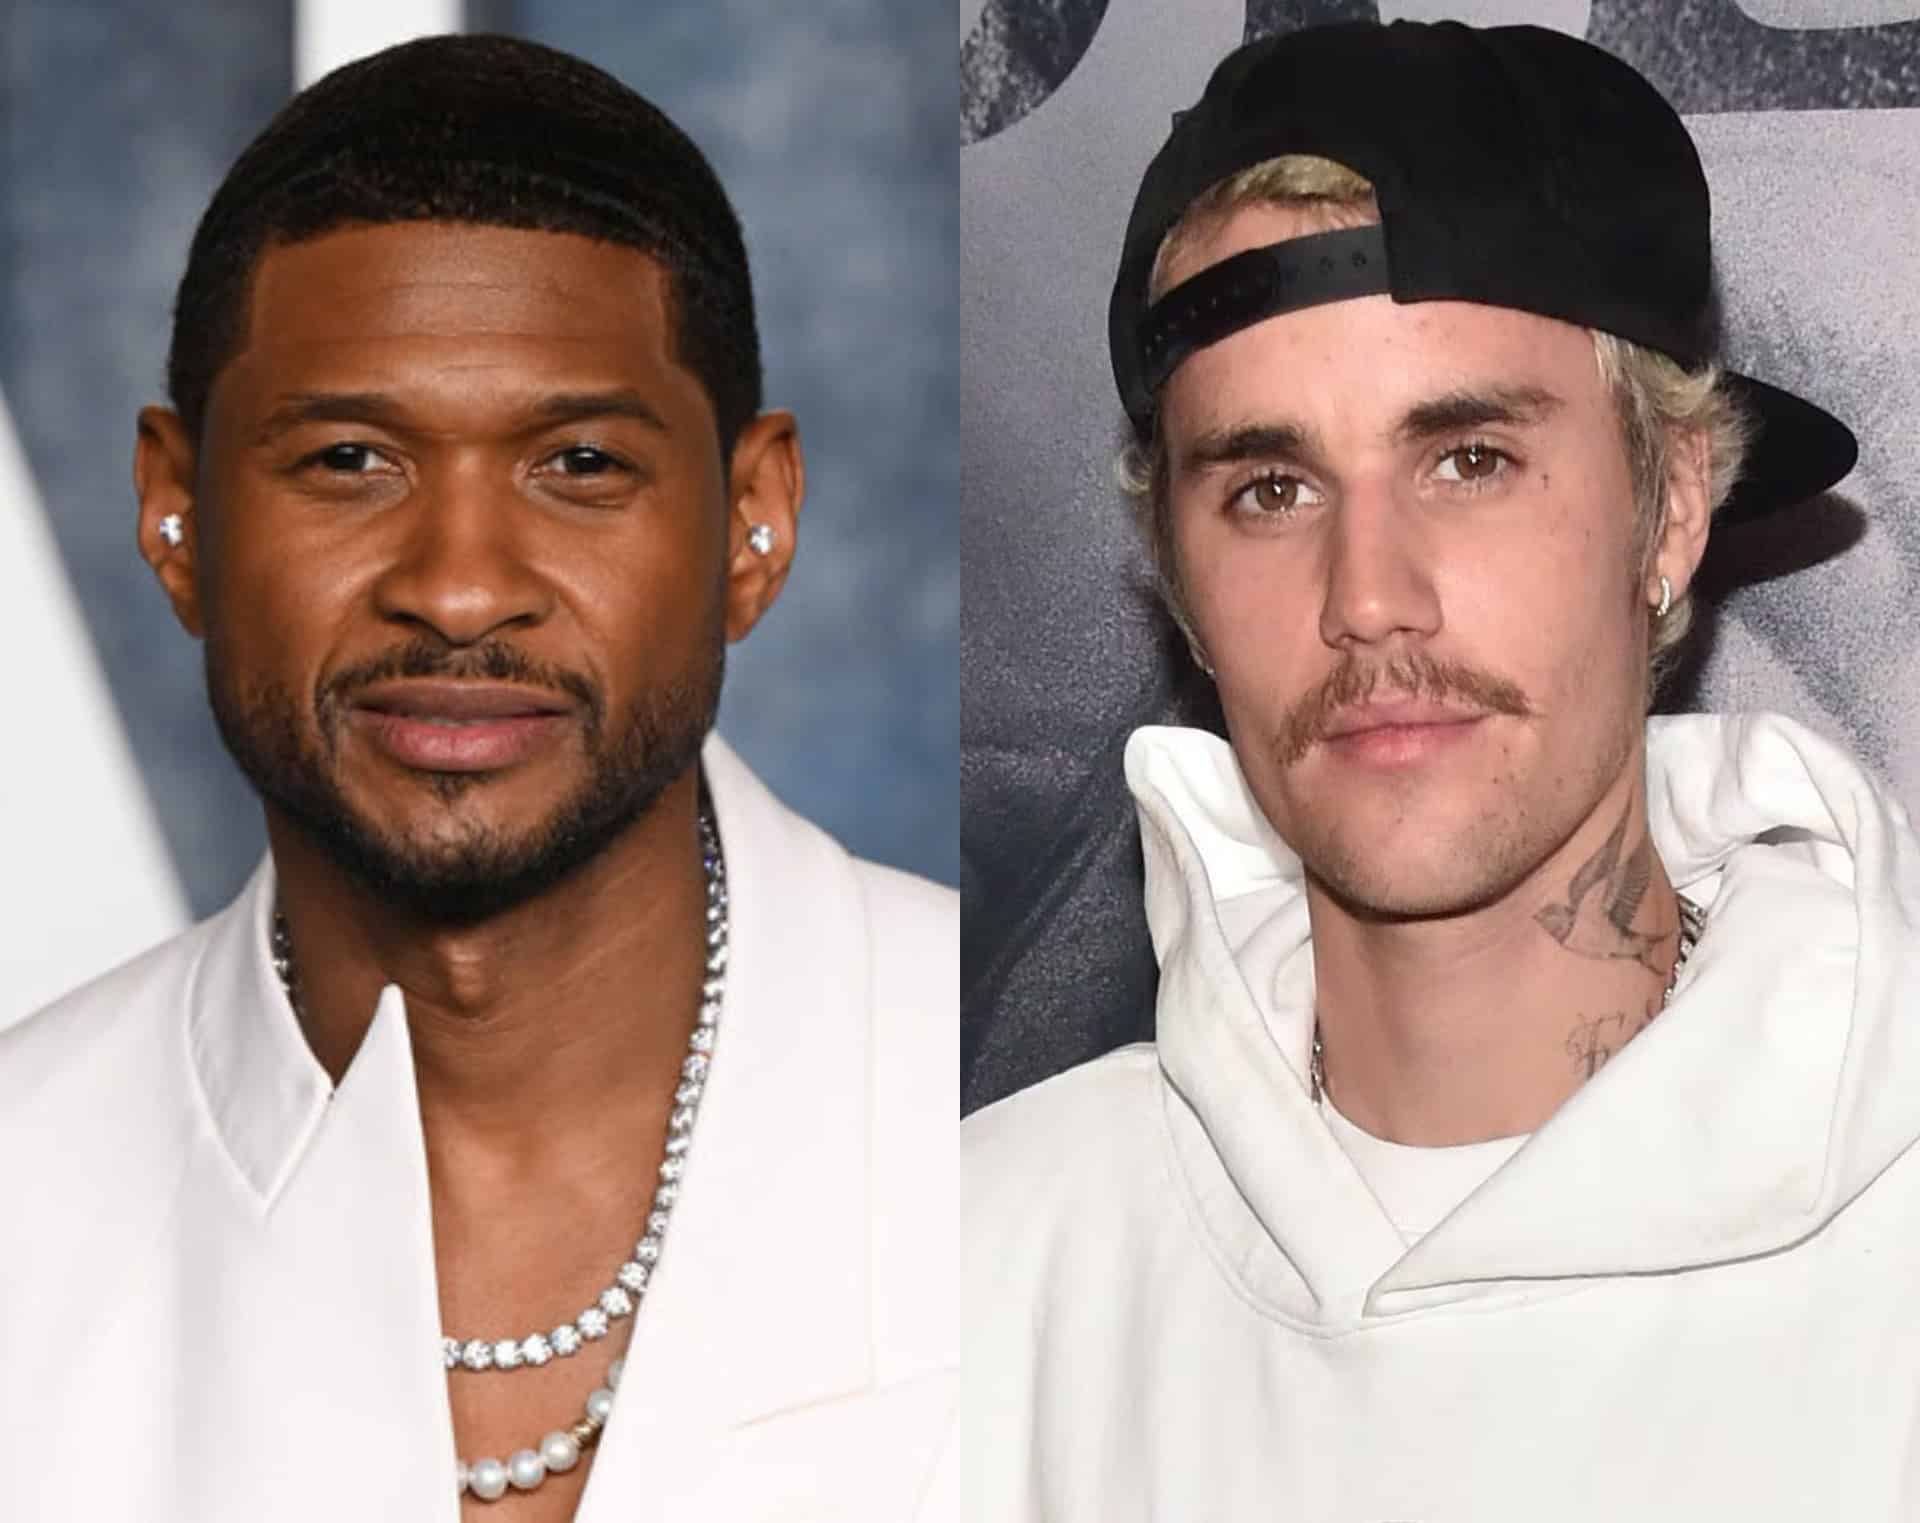 Usher Responds To Justin Bieber's Absence From Super Bowl Halftime Show